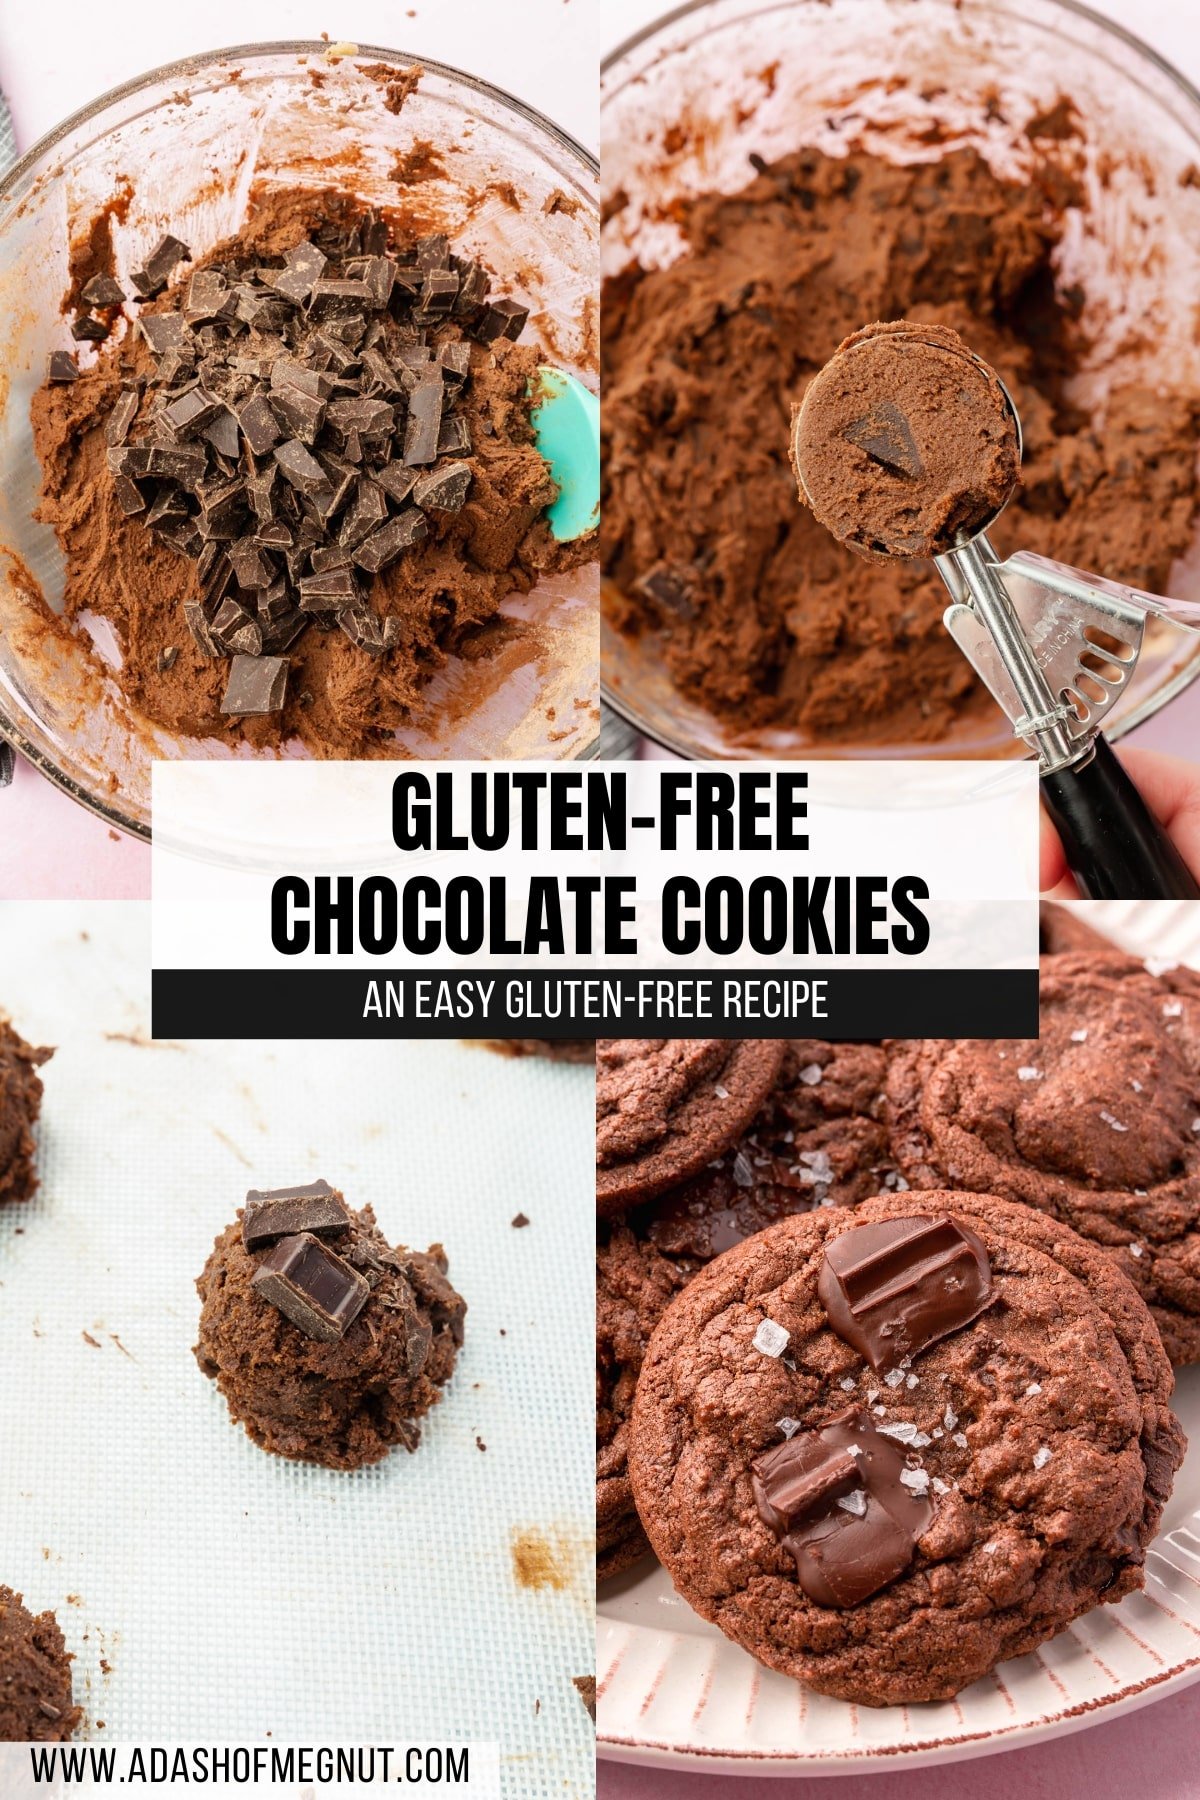 A four photo collage showing the process of making gluten-free chocolate cookies. Photo 1: A gluten-free chocolate cookie dough topped with chopped chocolate in a glass mixing bowl with a blue spatula. Photo 2: A cookie scoop filled with gluten-free chocolate chunk cookie dough over a bowl of more cookie dough. Photo 3: A close up of a gluten-free chocolate cookie dough ball topped with two chunks of chopped chocolate. Photo 4: A closeup of a pile of gluten-free chocolate chunk cookies topped with flaky Maldon salt.